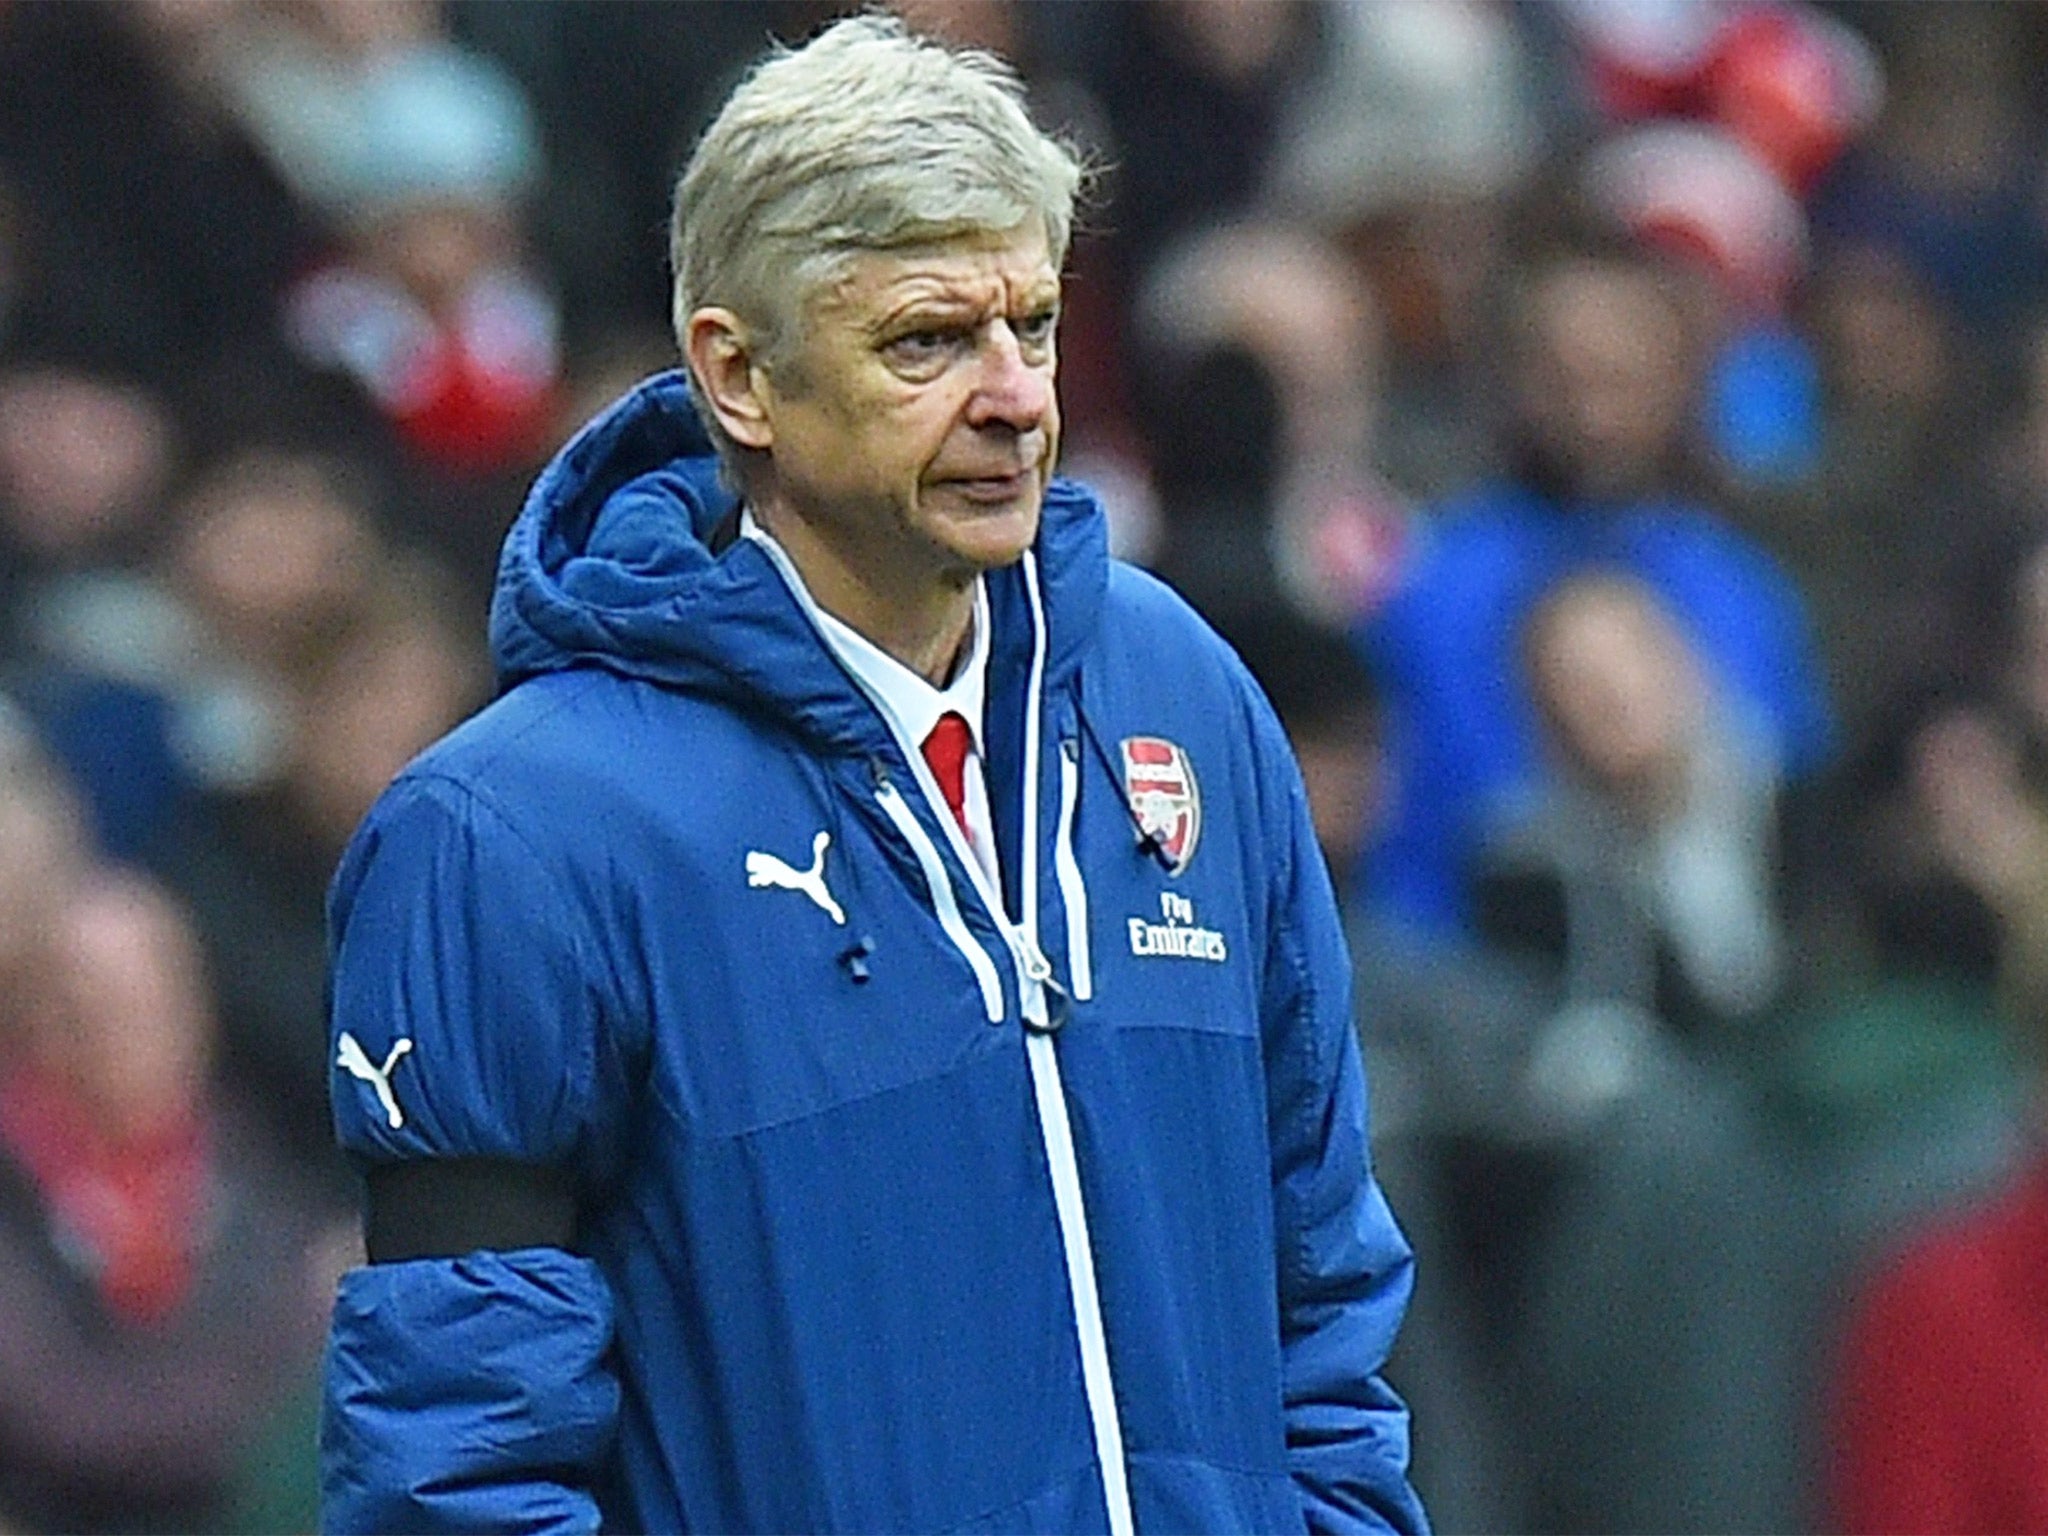 Thierry Henry says the abuse Arsène Wenger got from some fans was ‘out of order’